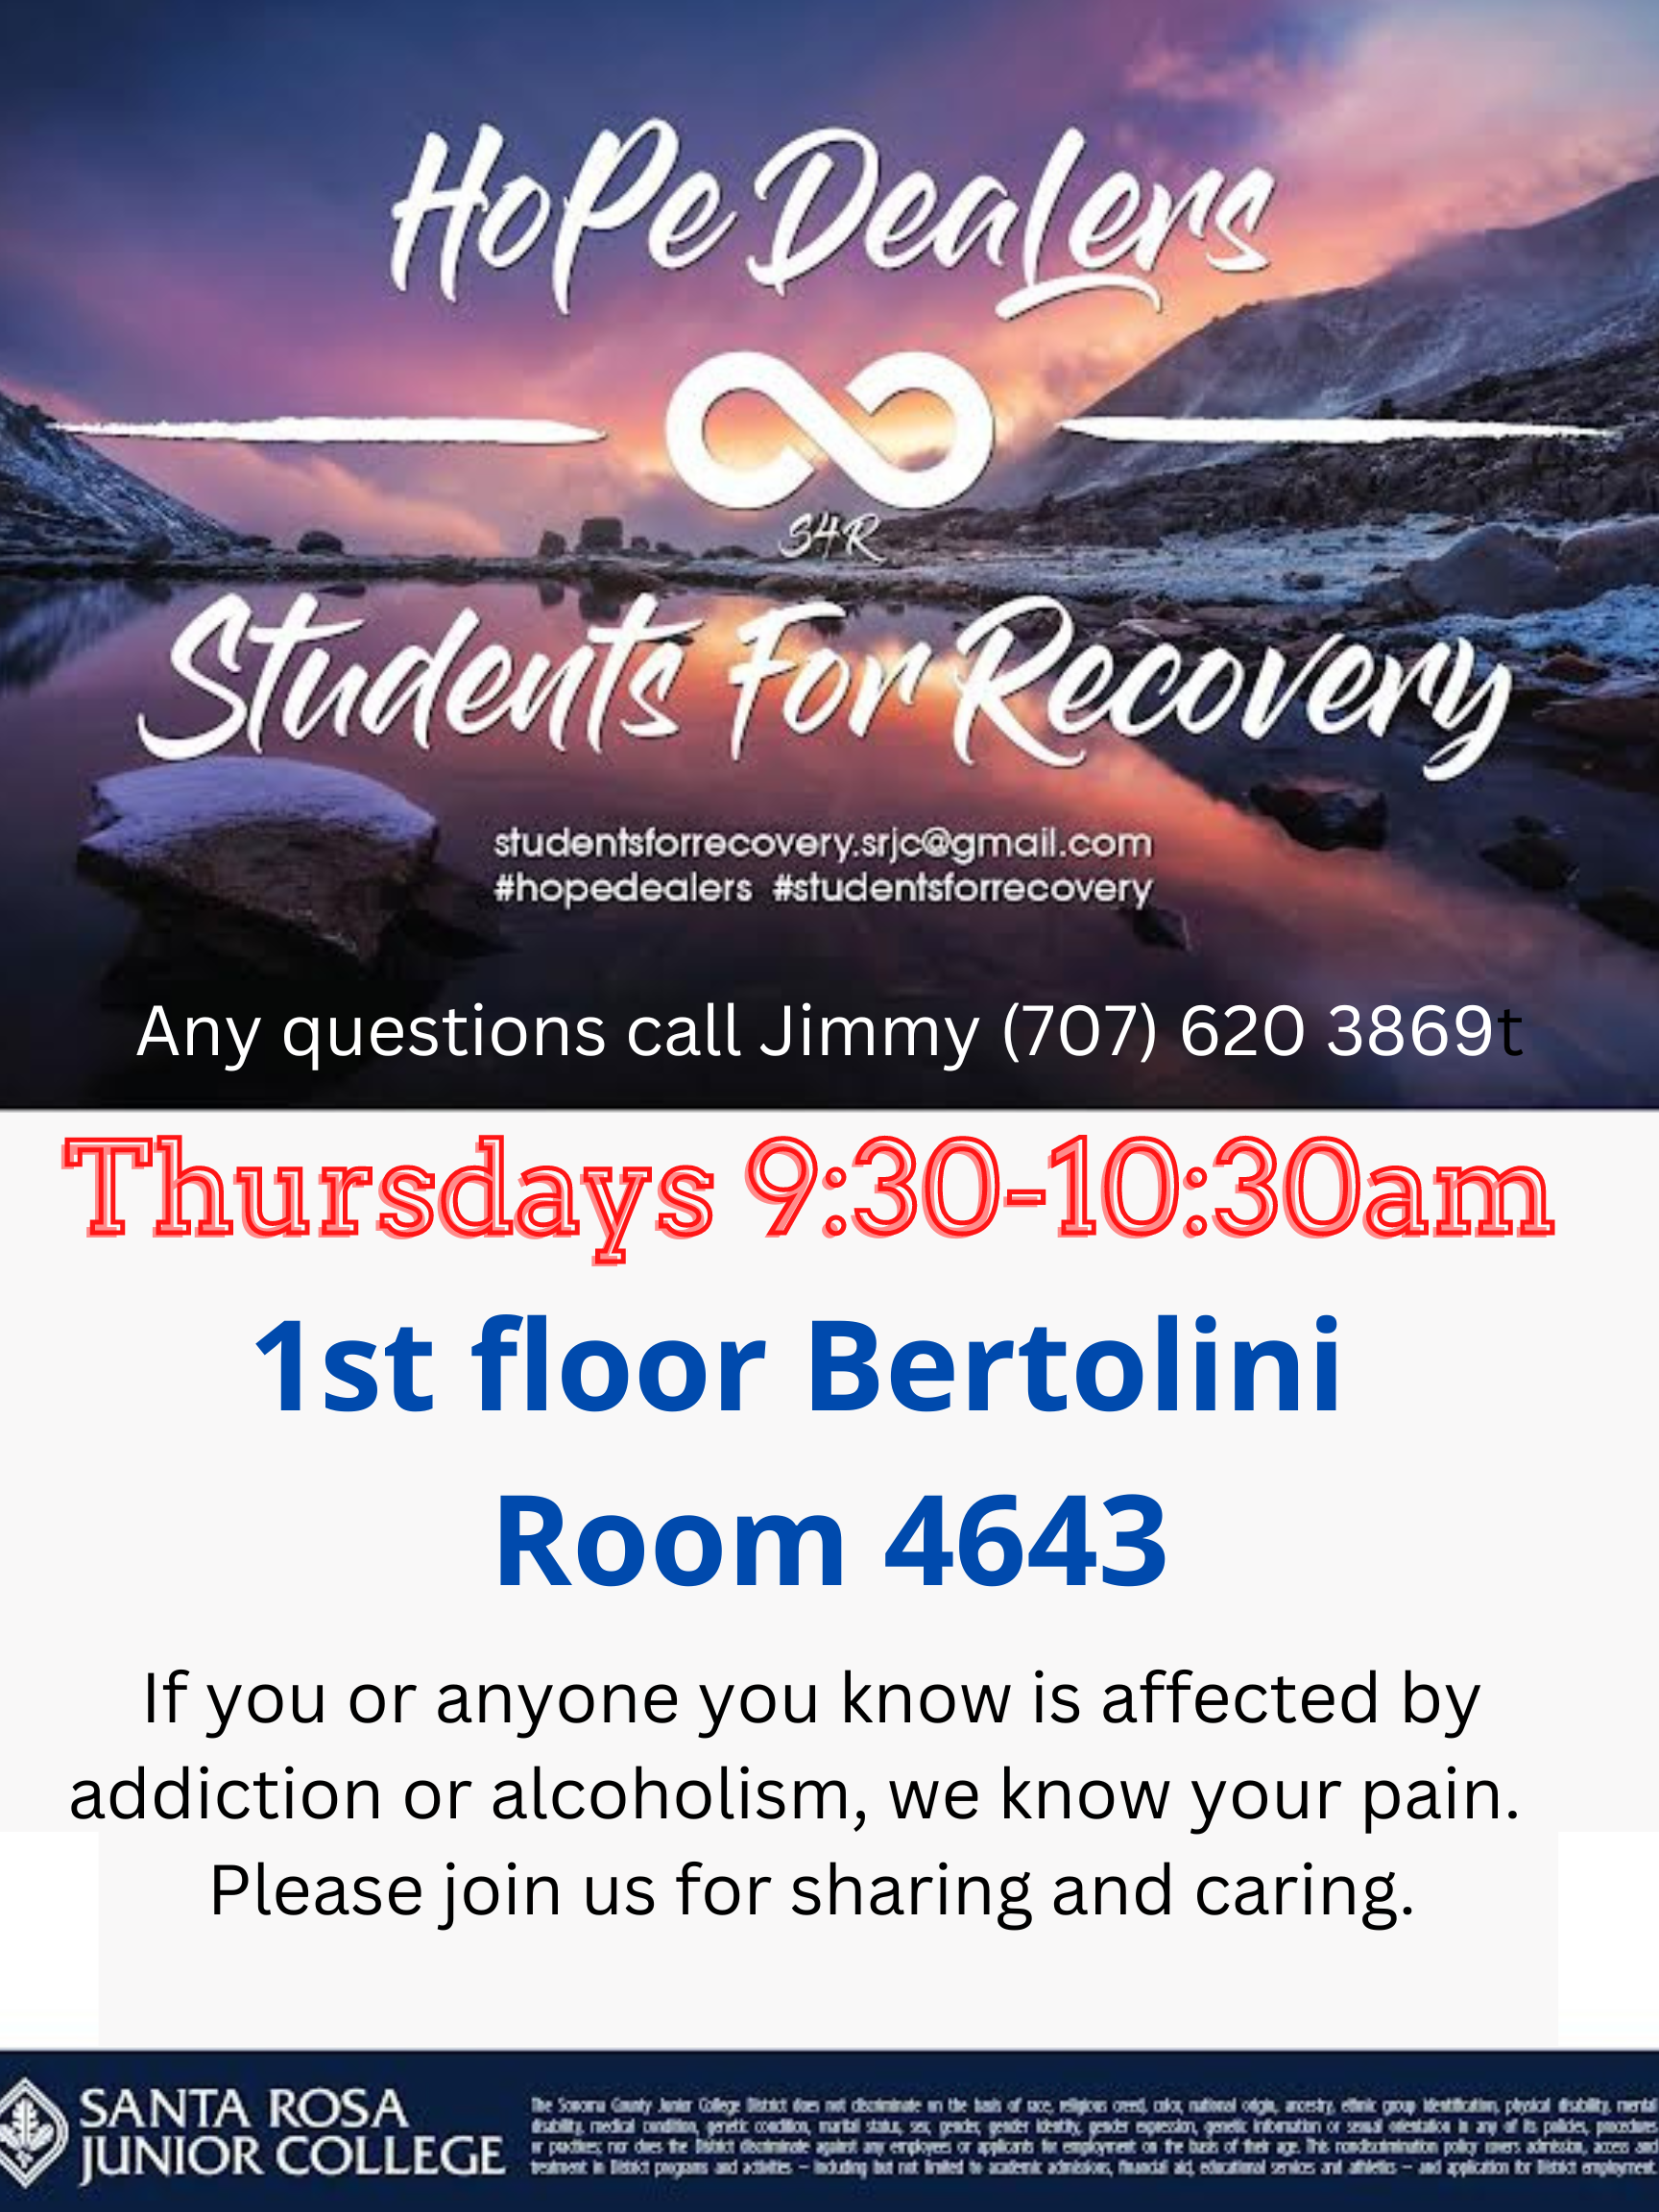 Students for Recovery is a safe space for students to support each other and discover healthy connections. Thursdays from 9:30 AM to 10:30 AM. 1st Floor of Bertolini, room 4643. Questions? Call Jimmy at 7076203869